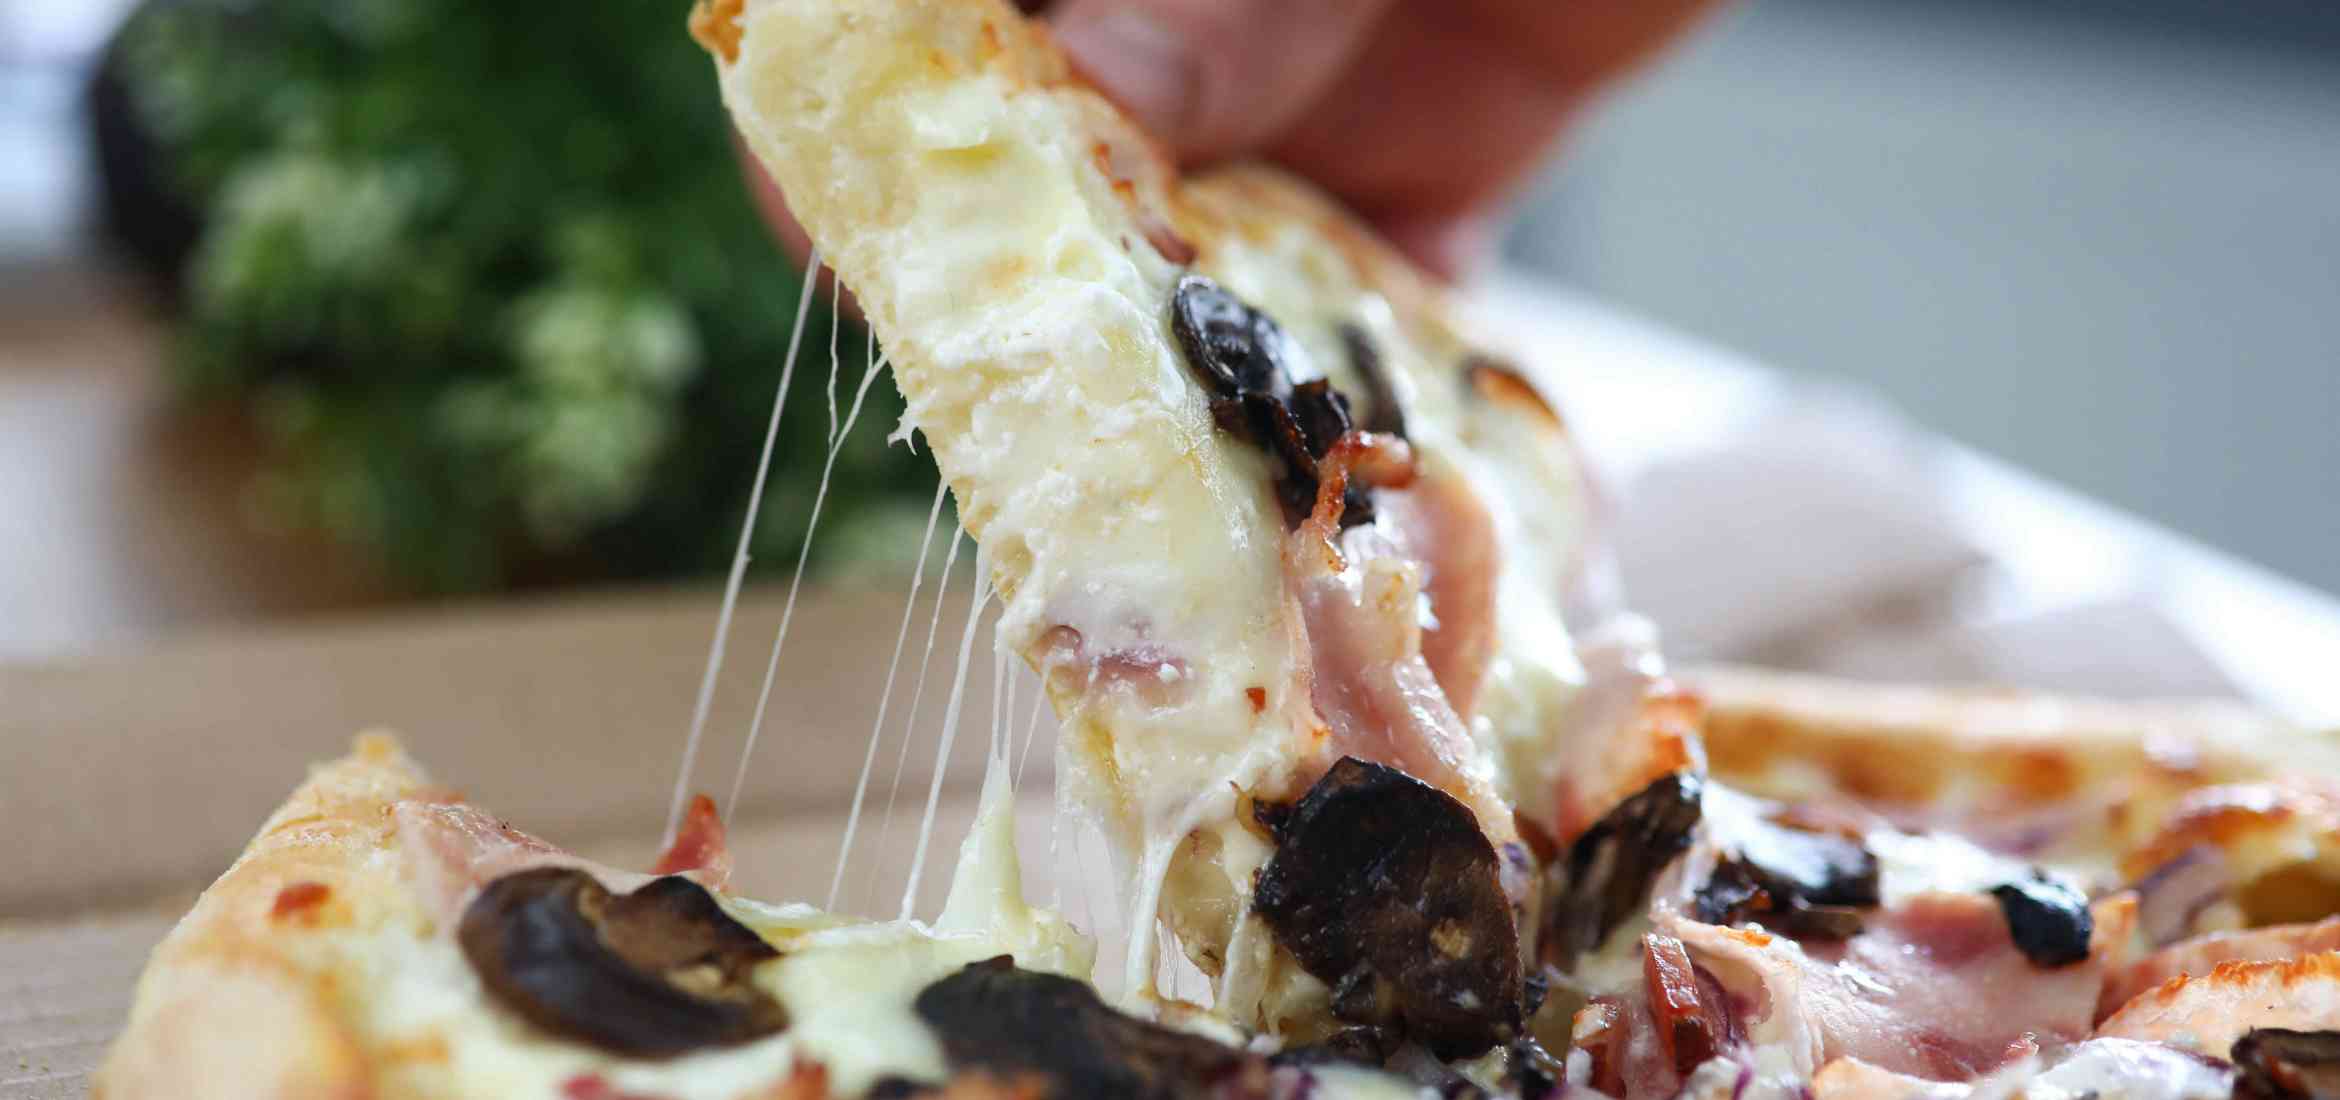 pizza-working-table-close-up####.jpg